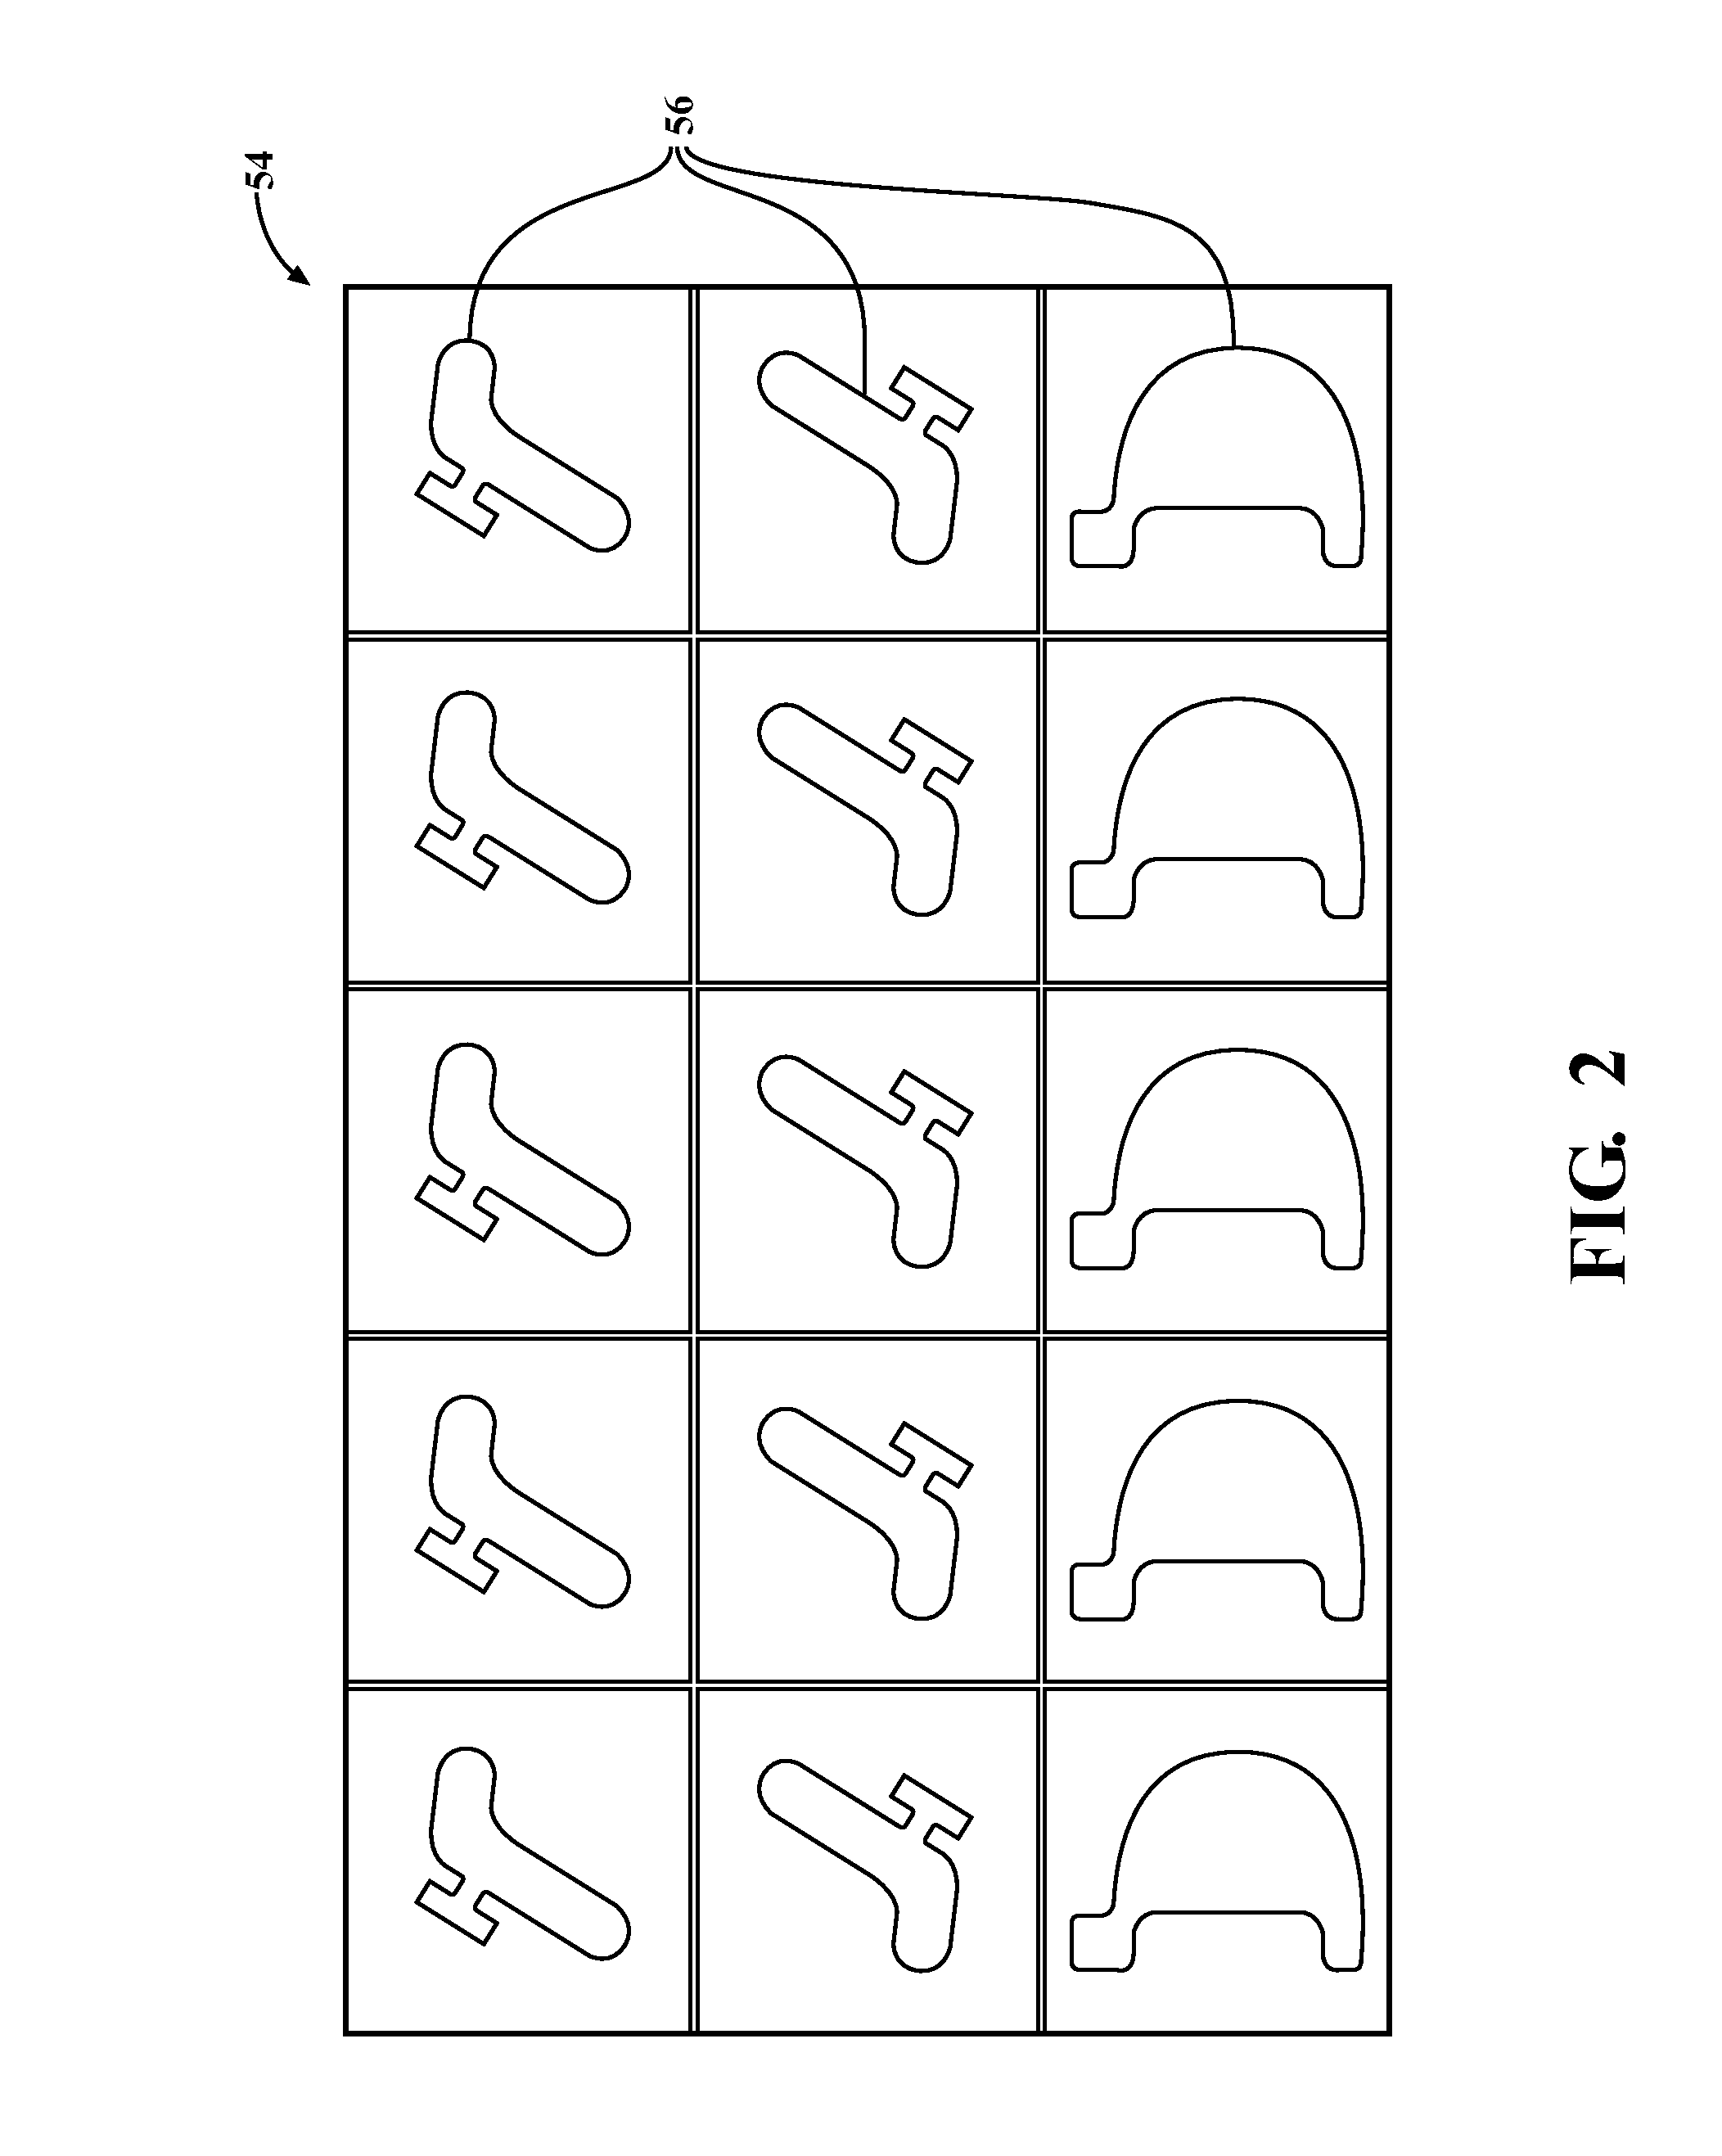 Hot Stamping System And Method